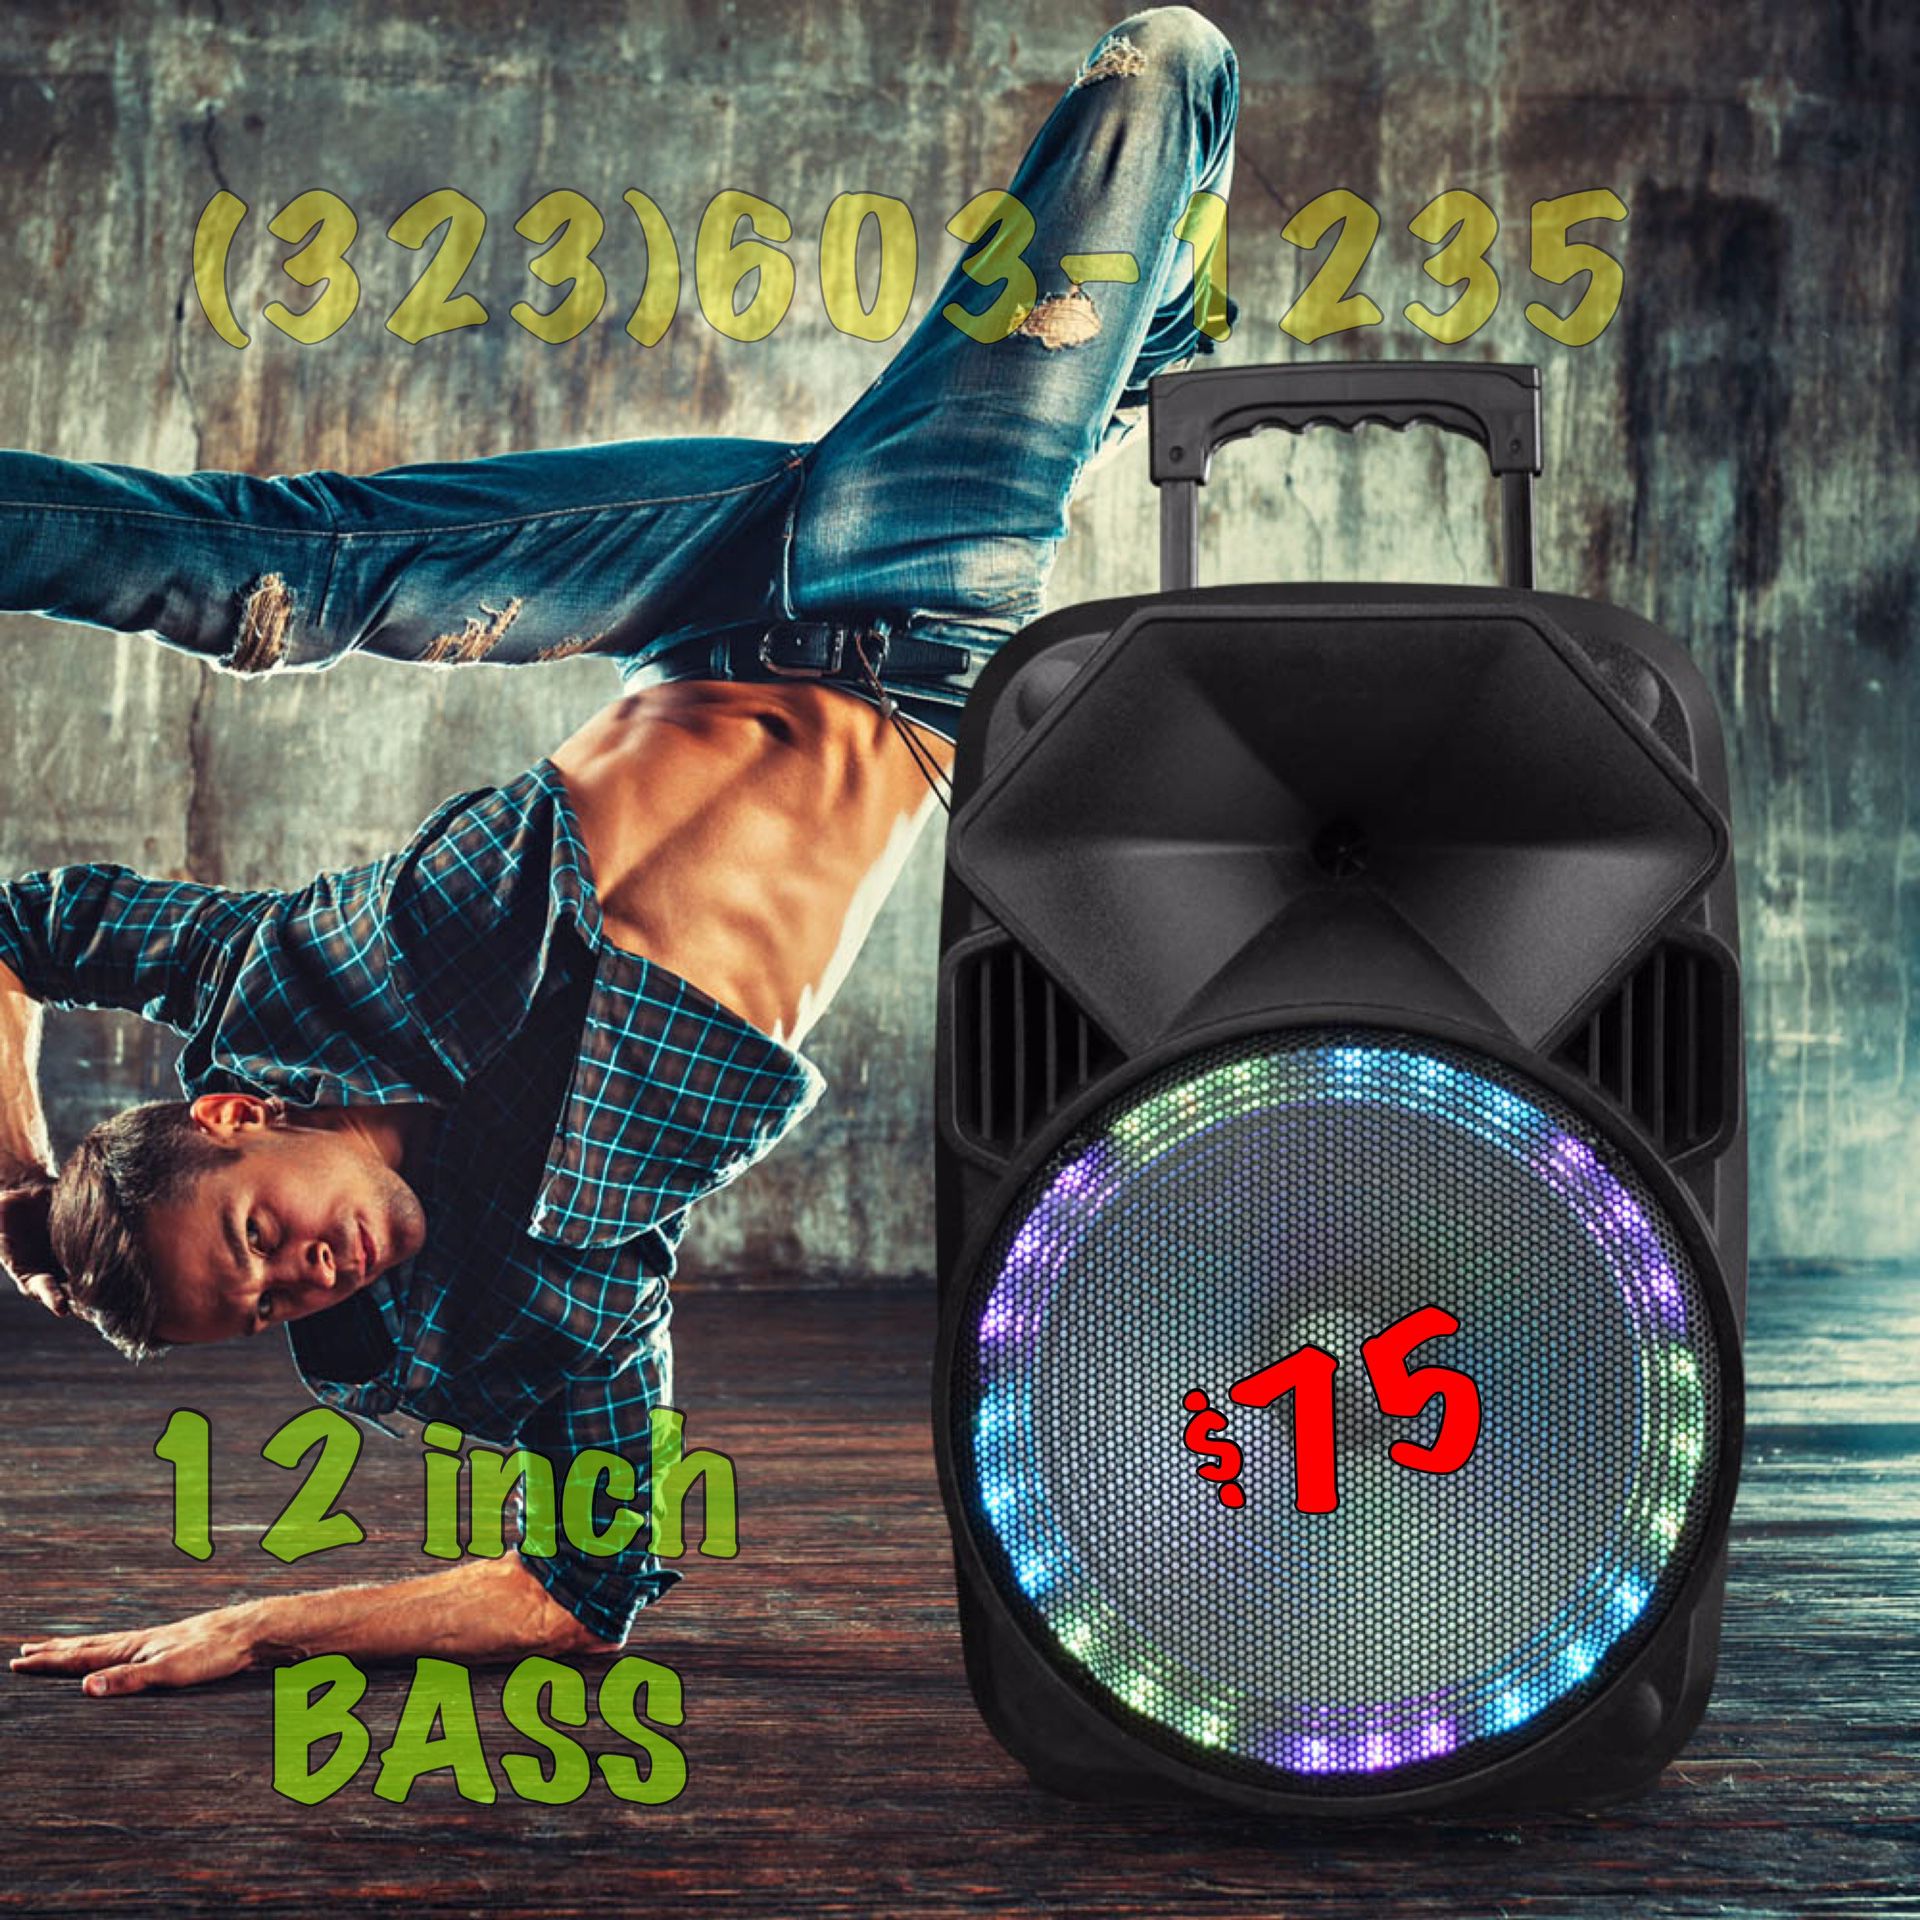 12 Inch Bluetooth Speaker • Loud W/ Bass • New In Box 💥 BBQ READY💥Get it Delivered*